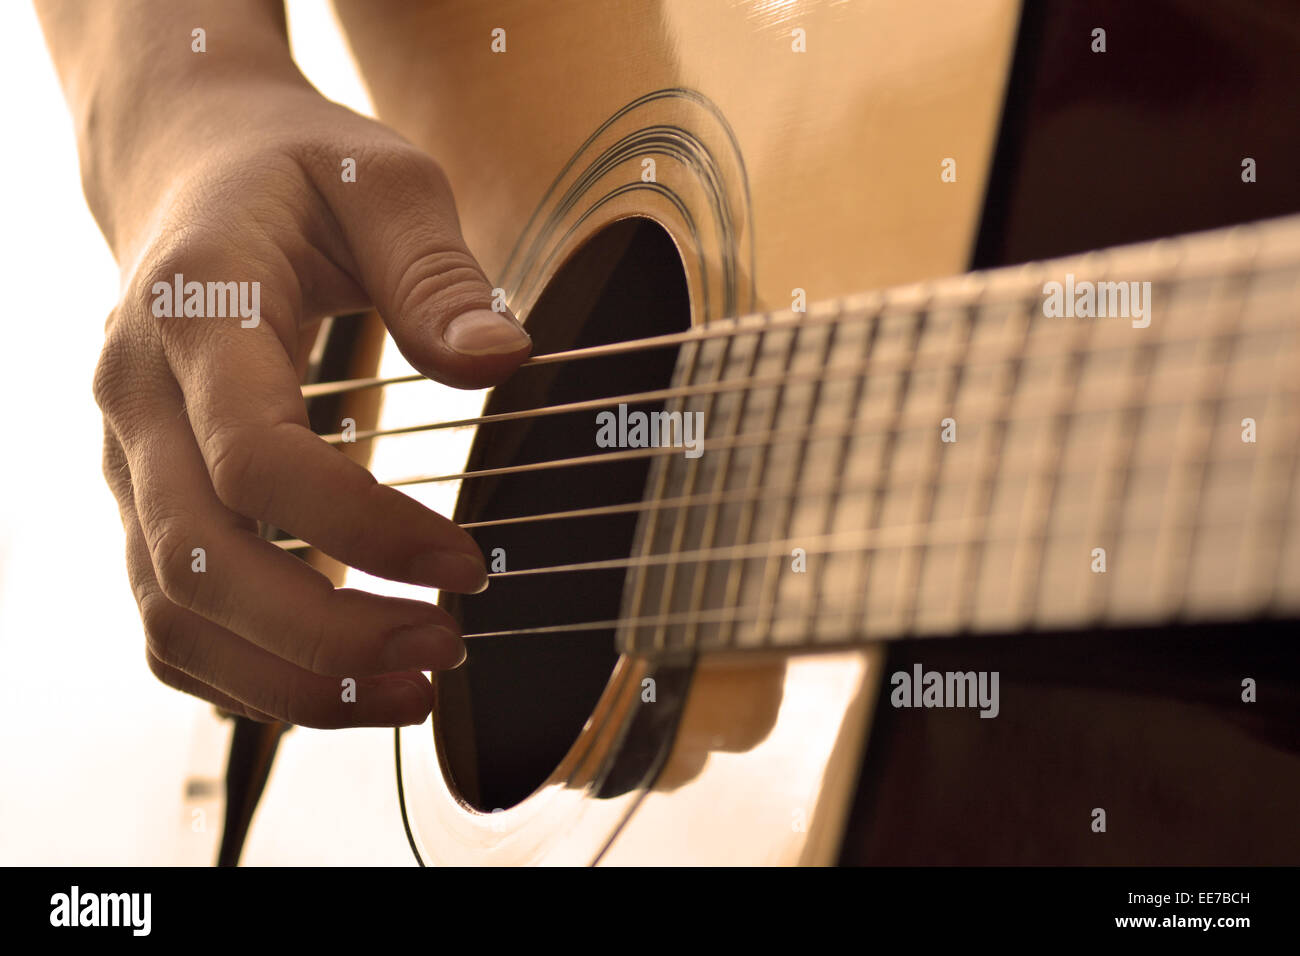 Playing guitar strings and frets for making music Stock Photo